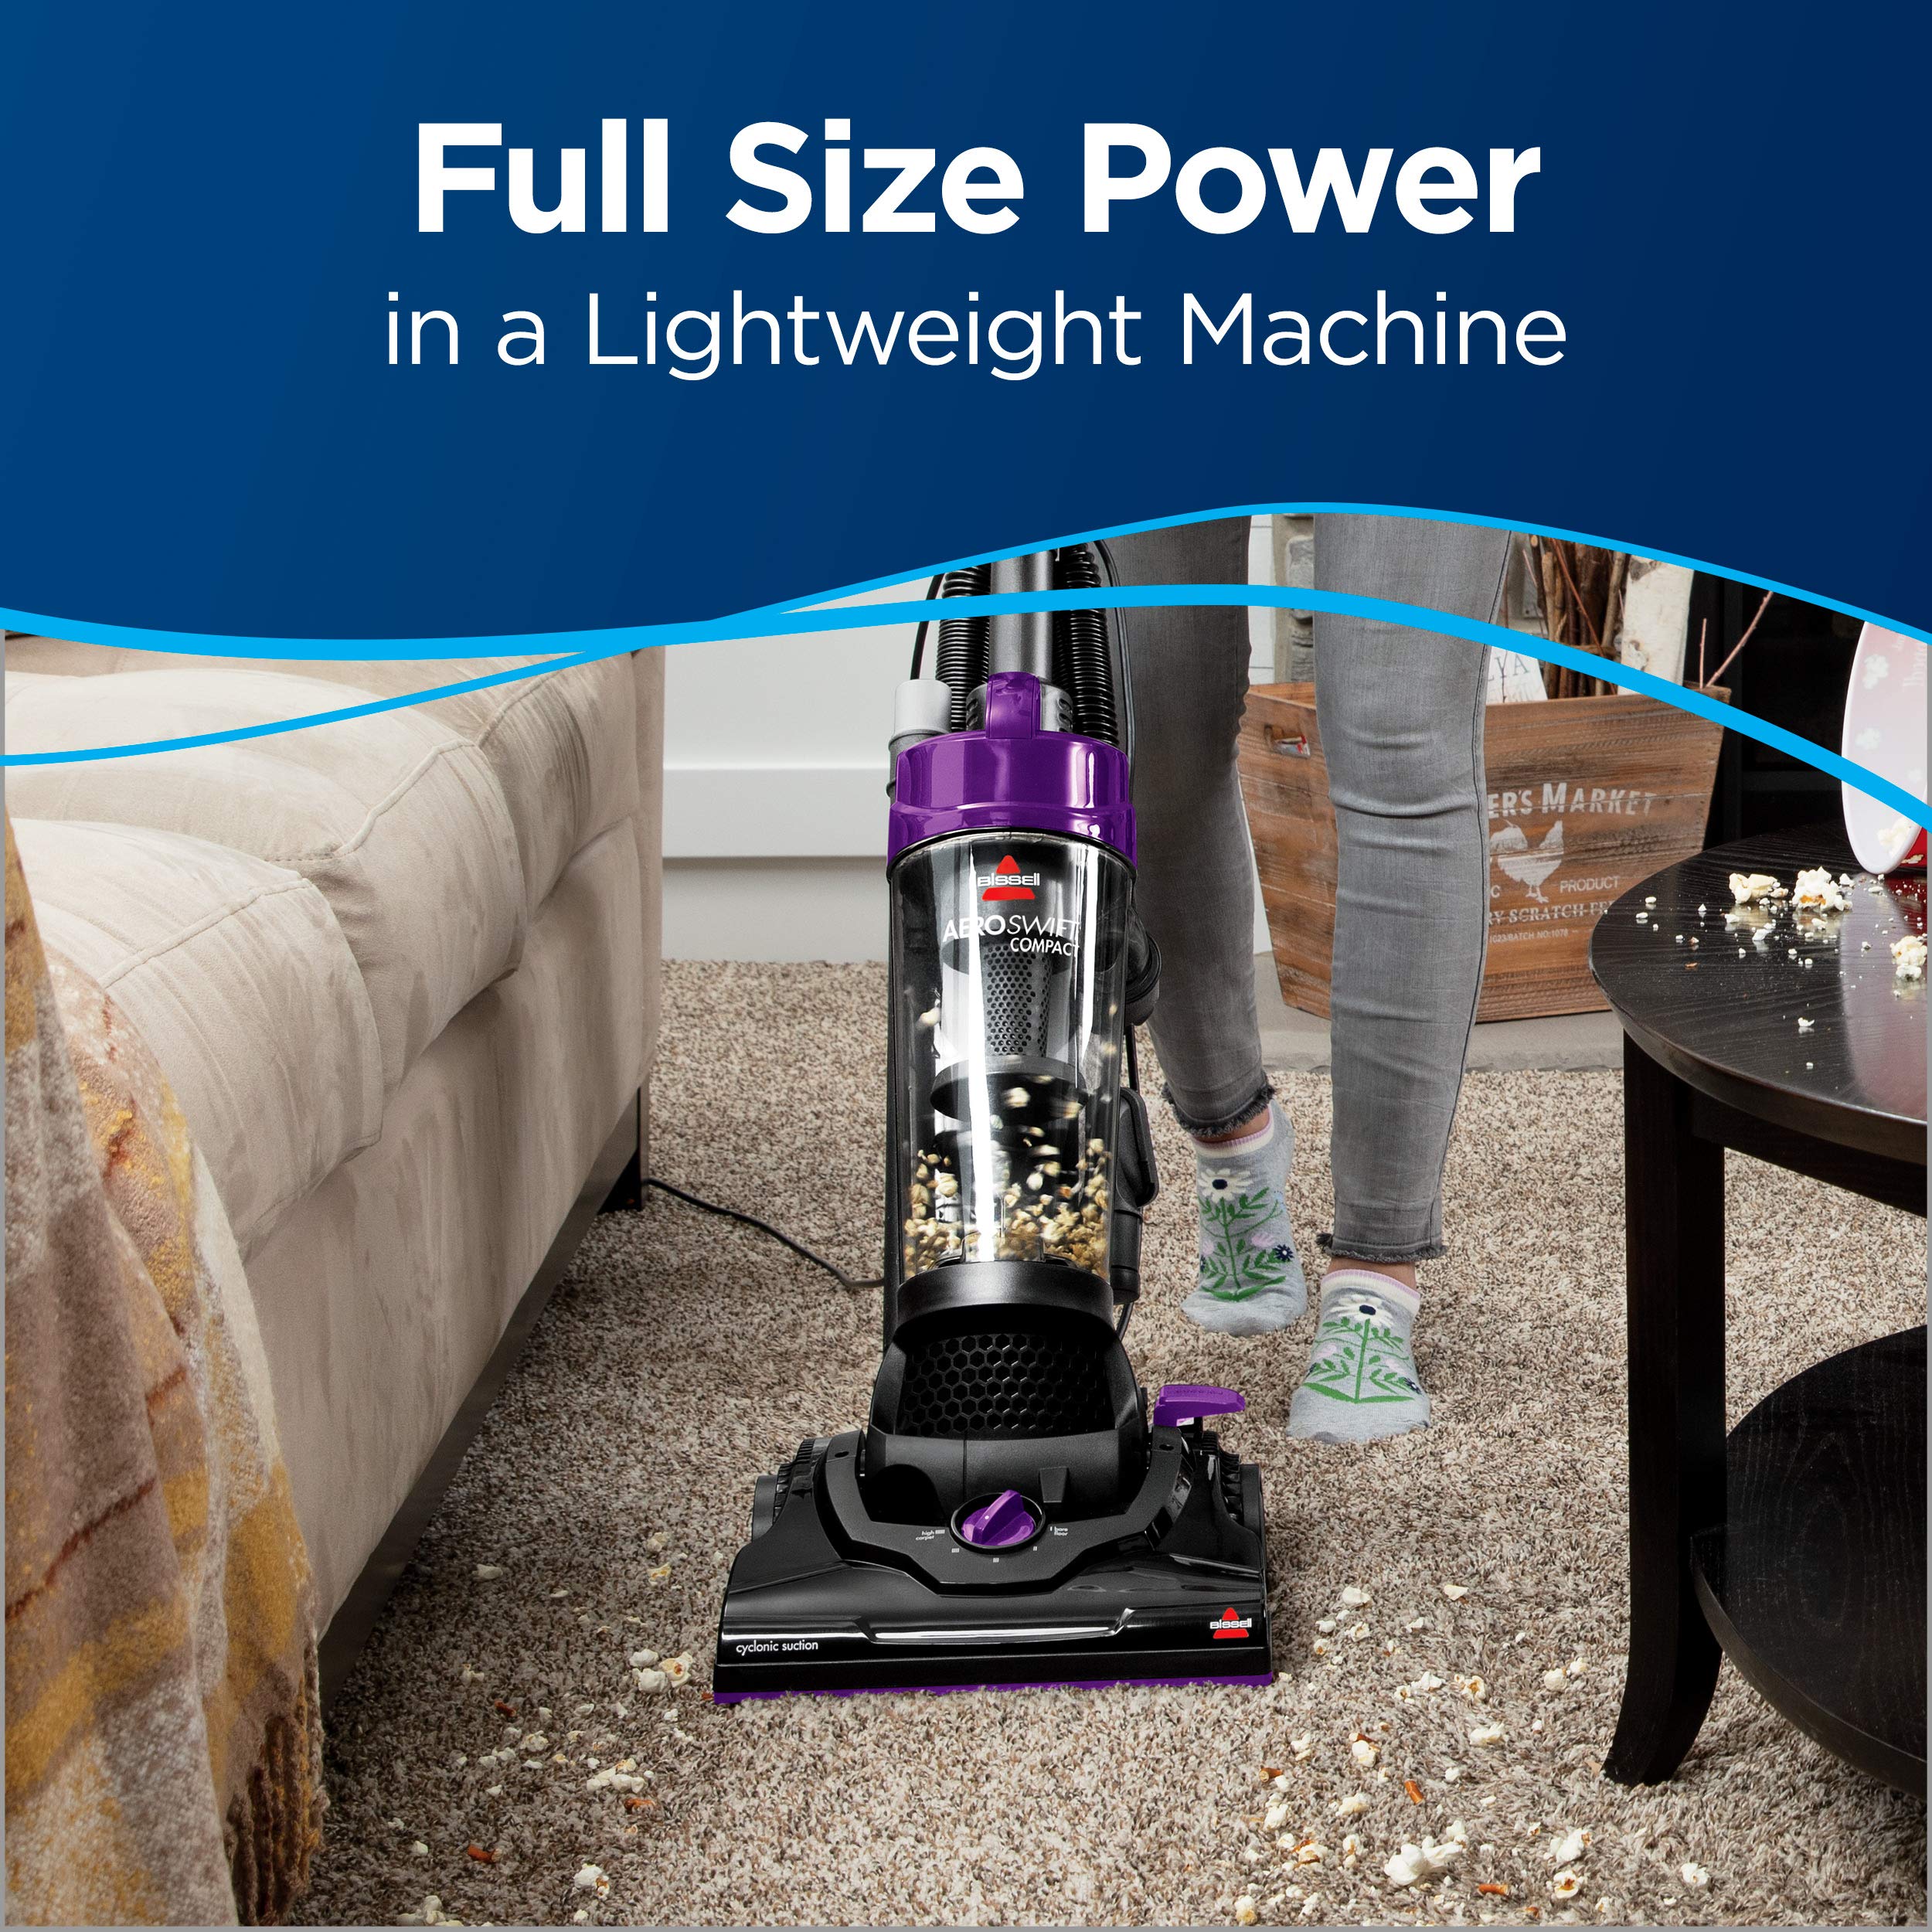 BISSELL Aeroswift Compact Vacuum Cleaner, 2612A,Purple - image 2 of 6